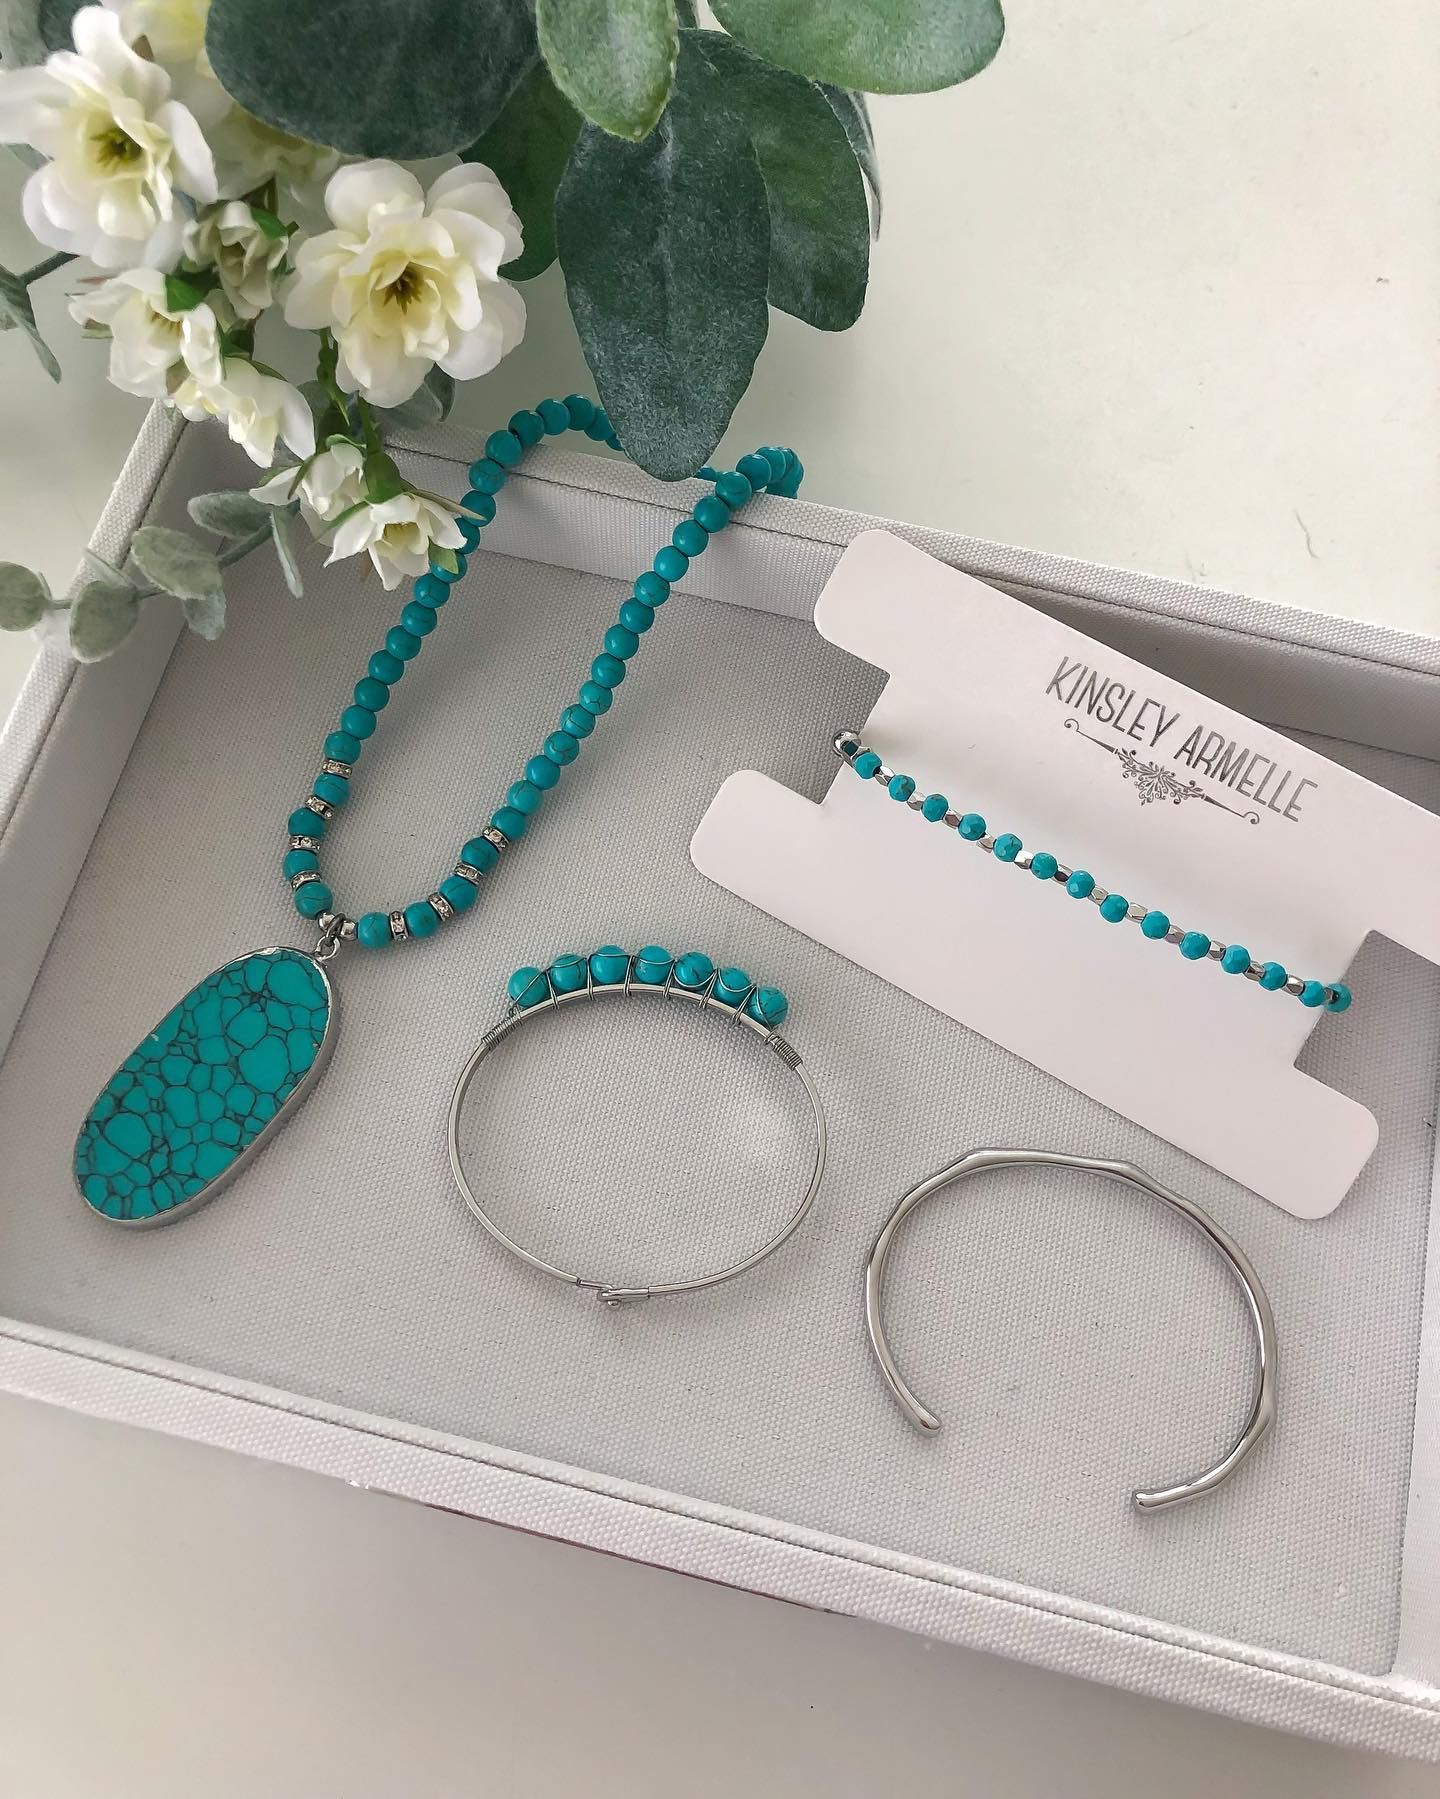 Silver Turquoise Necklace | Kinsley Armelle